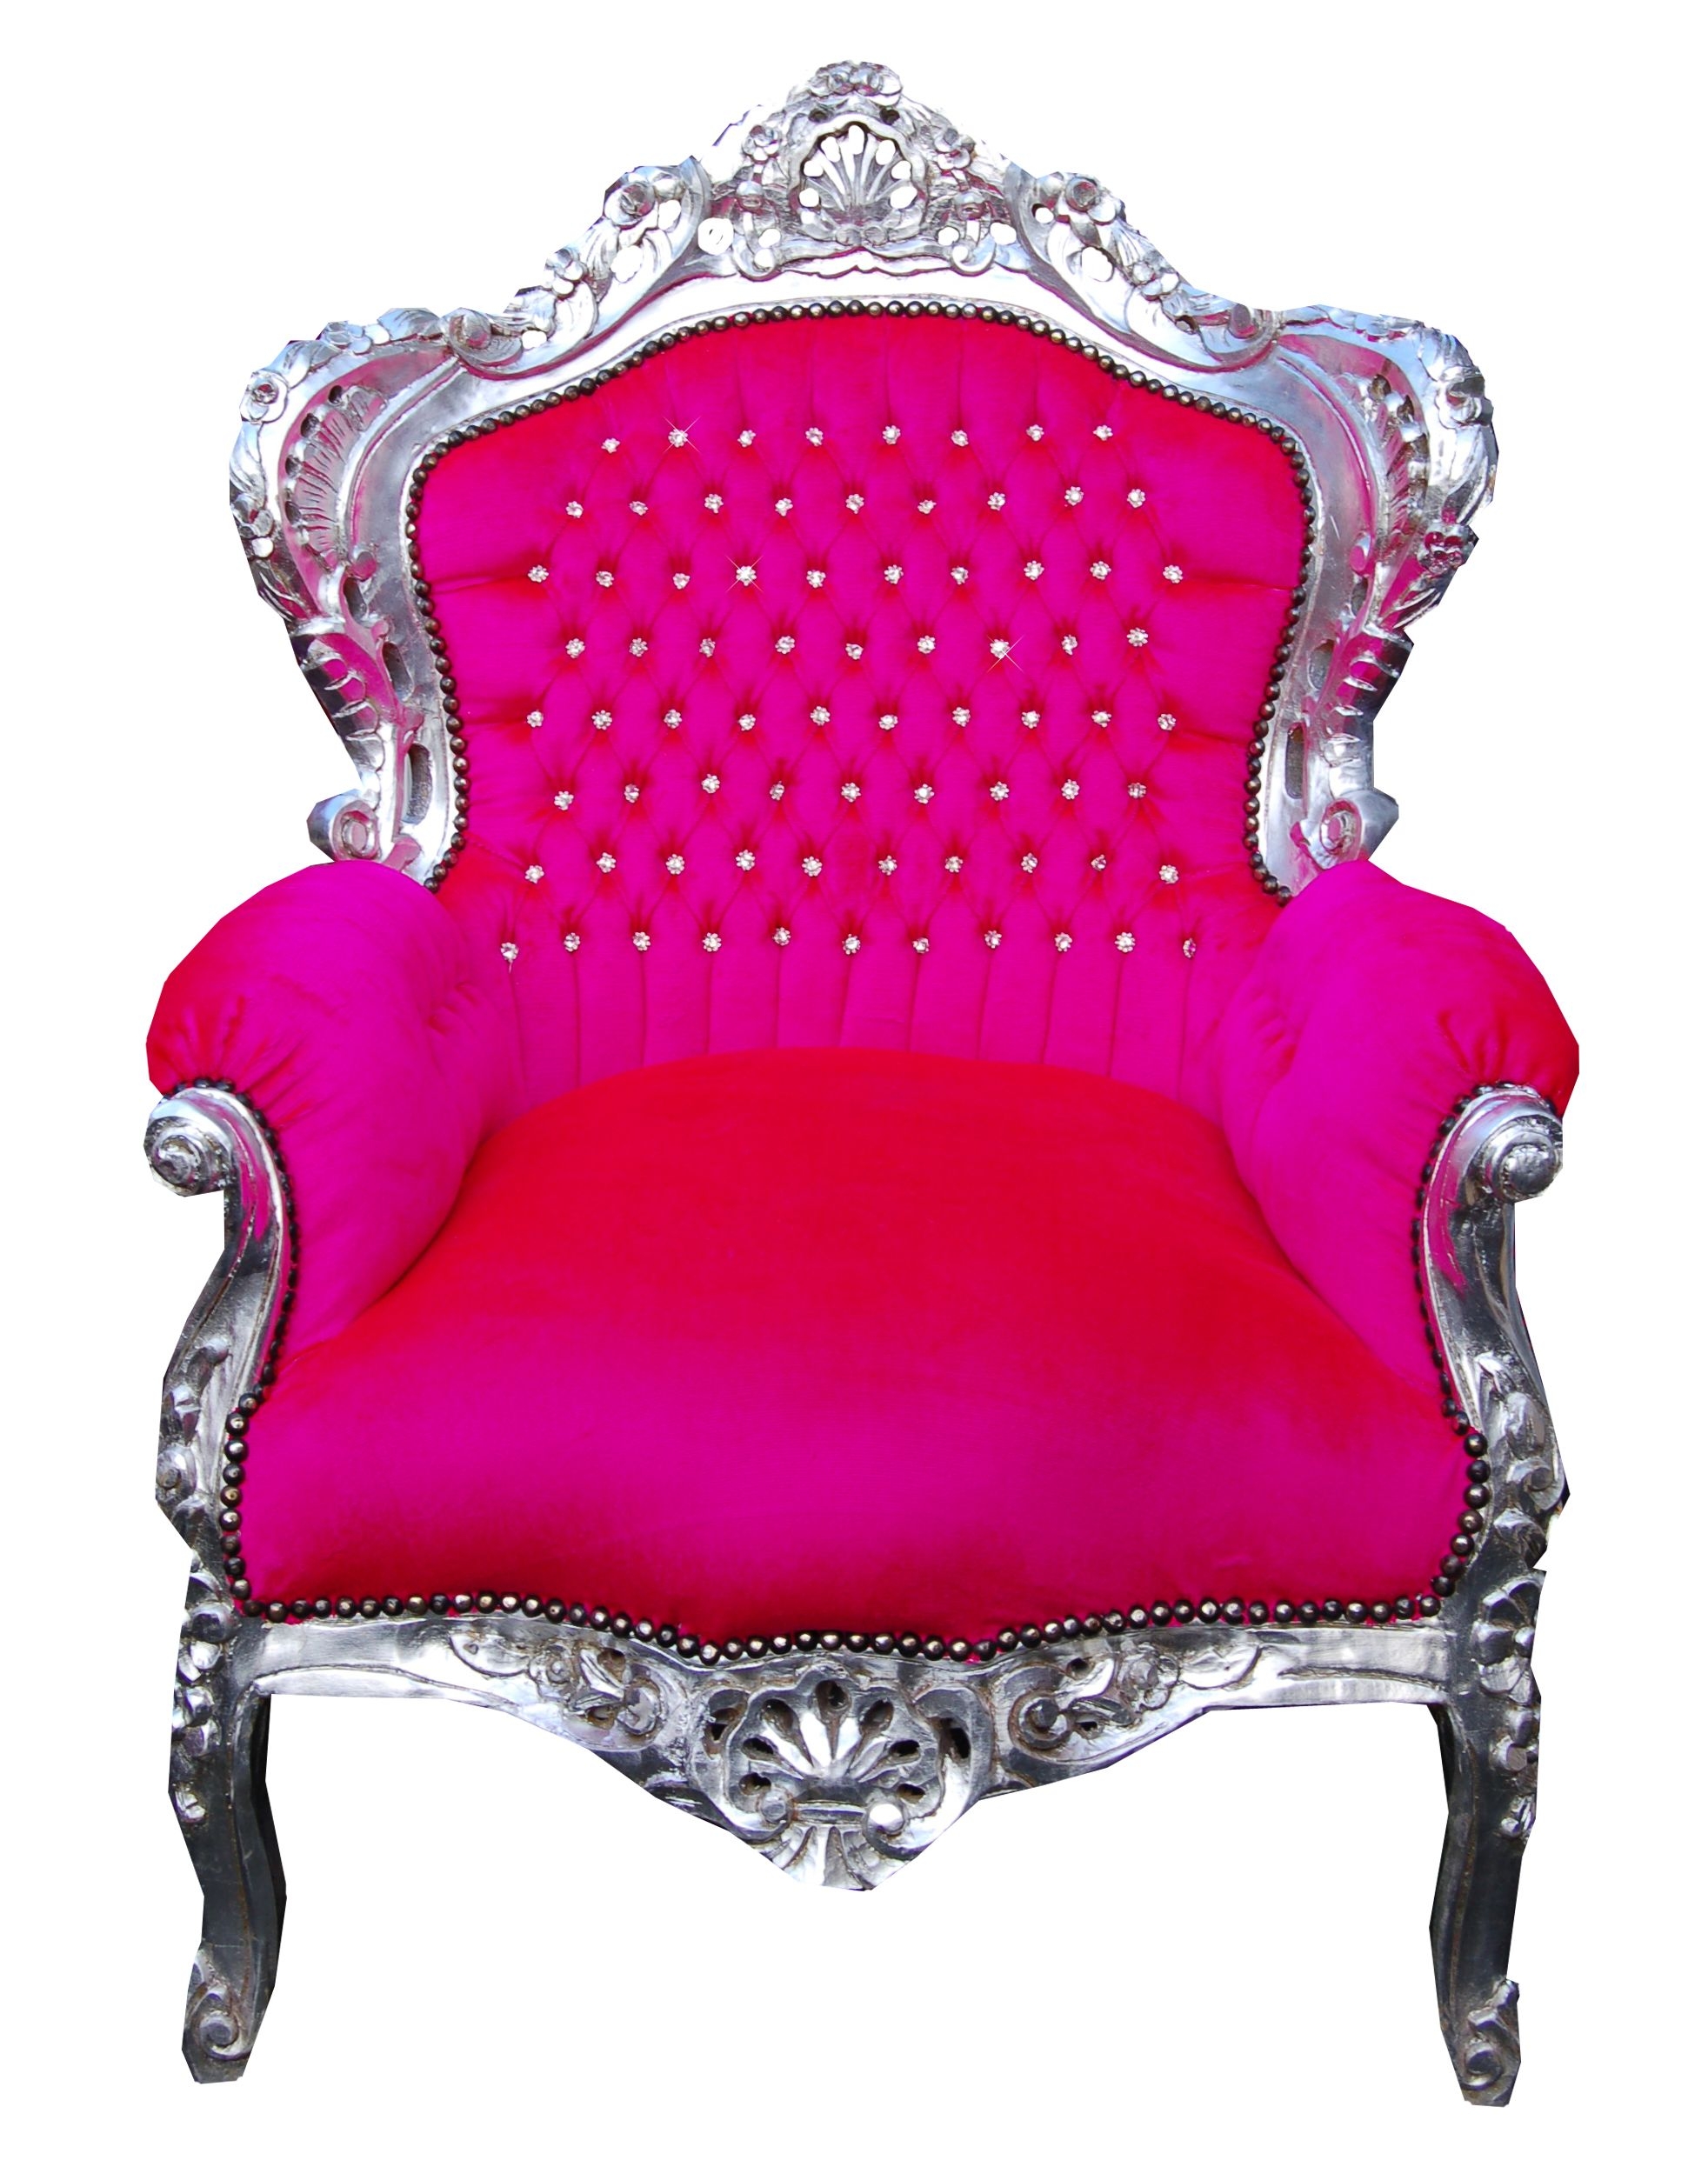 Hot Pink Accent Chair Ideas on Foter